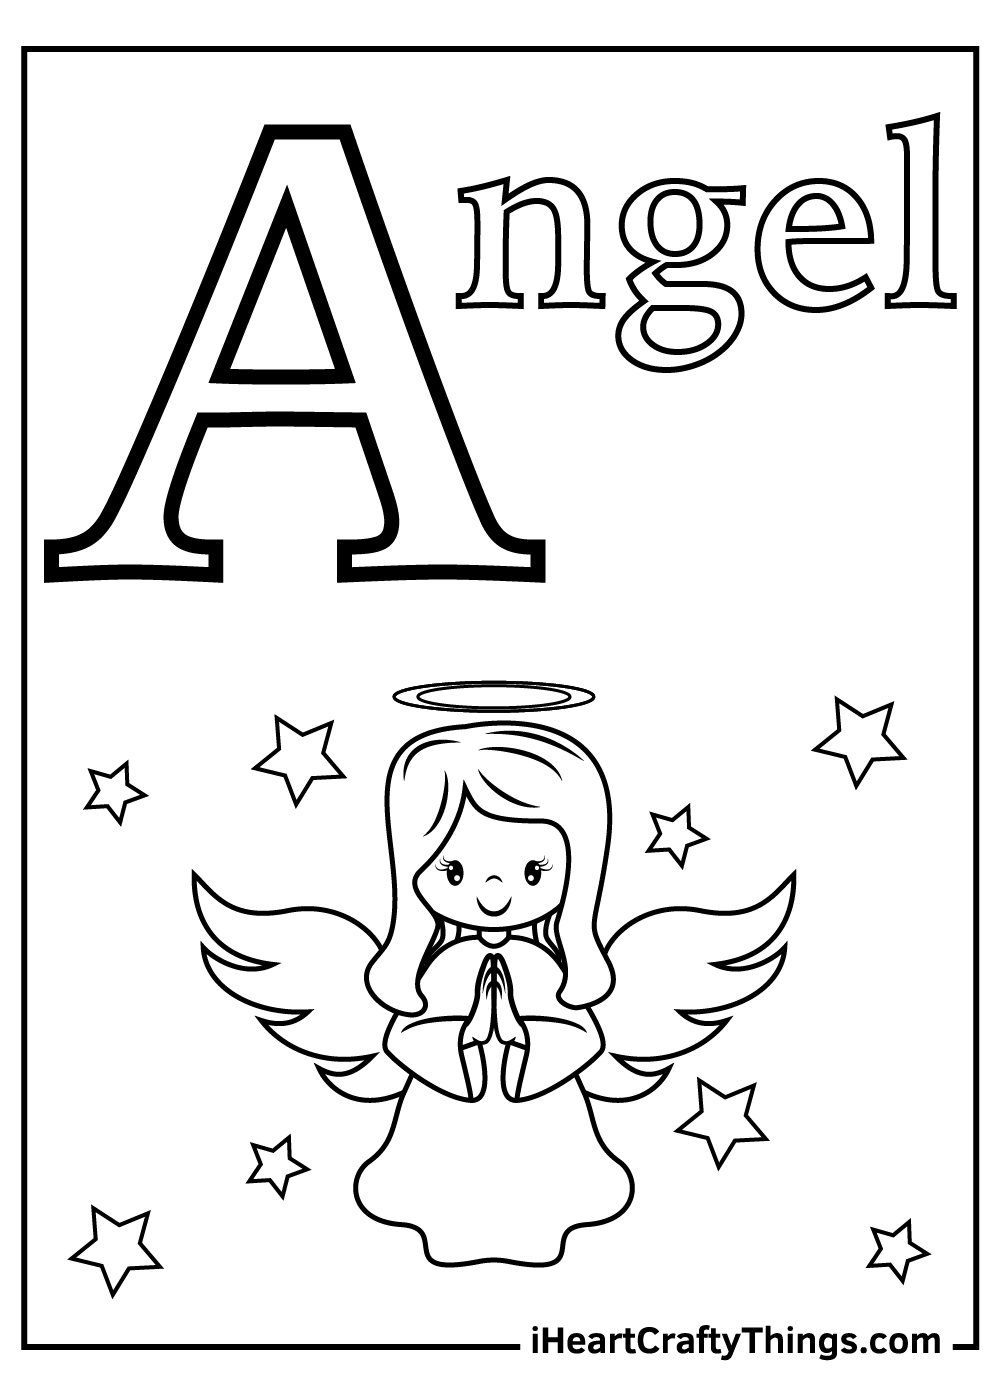 printable letter a coloring pages